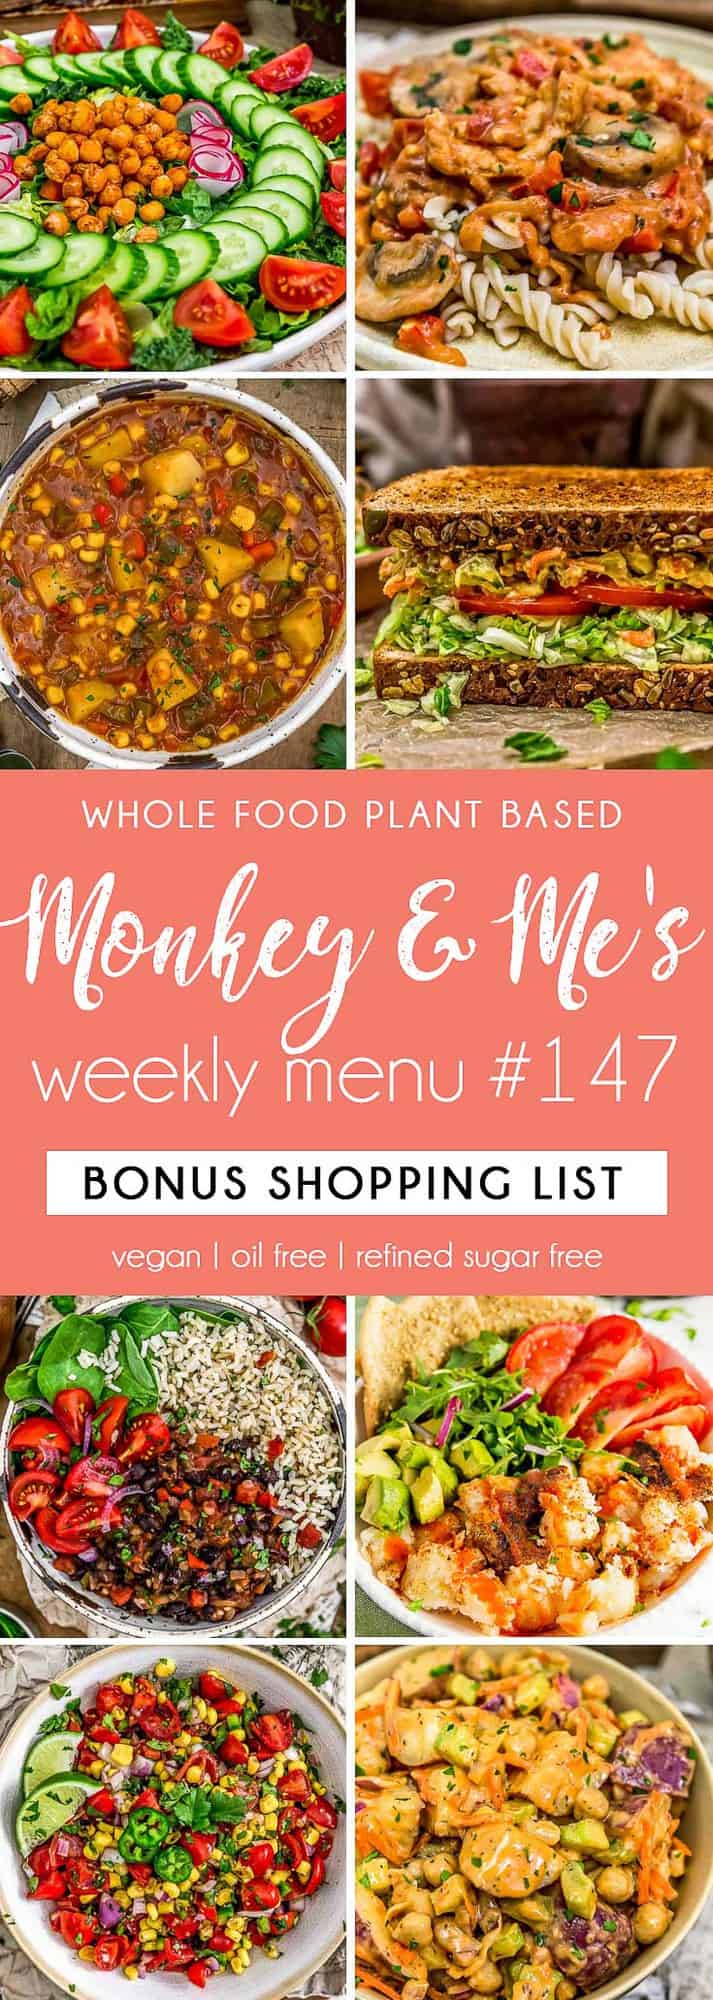 Monkey and Me's Menu 147 featuring 8 recipes